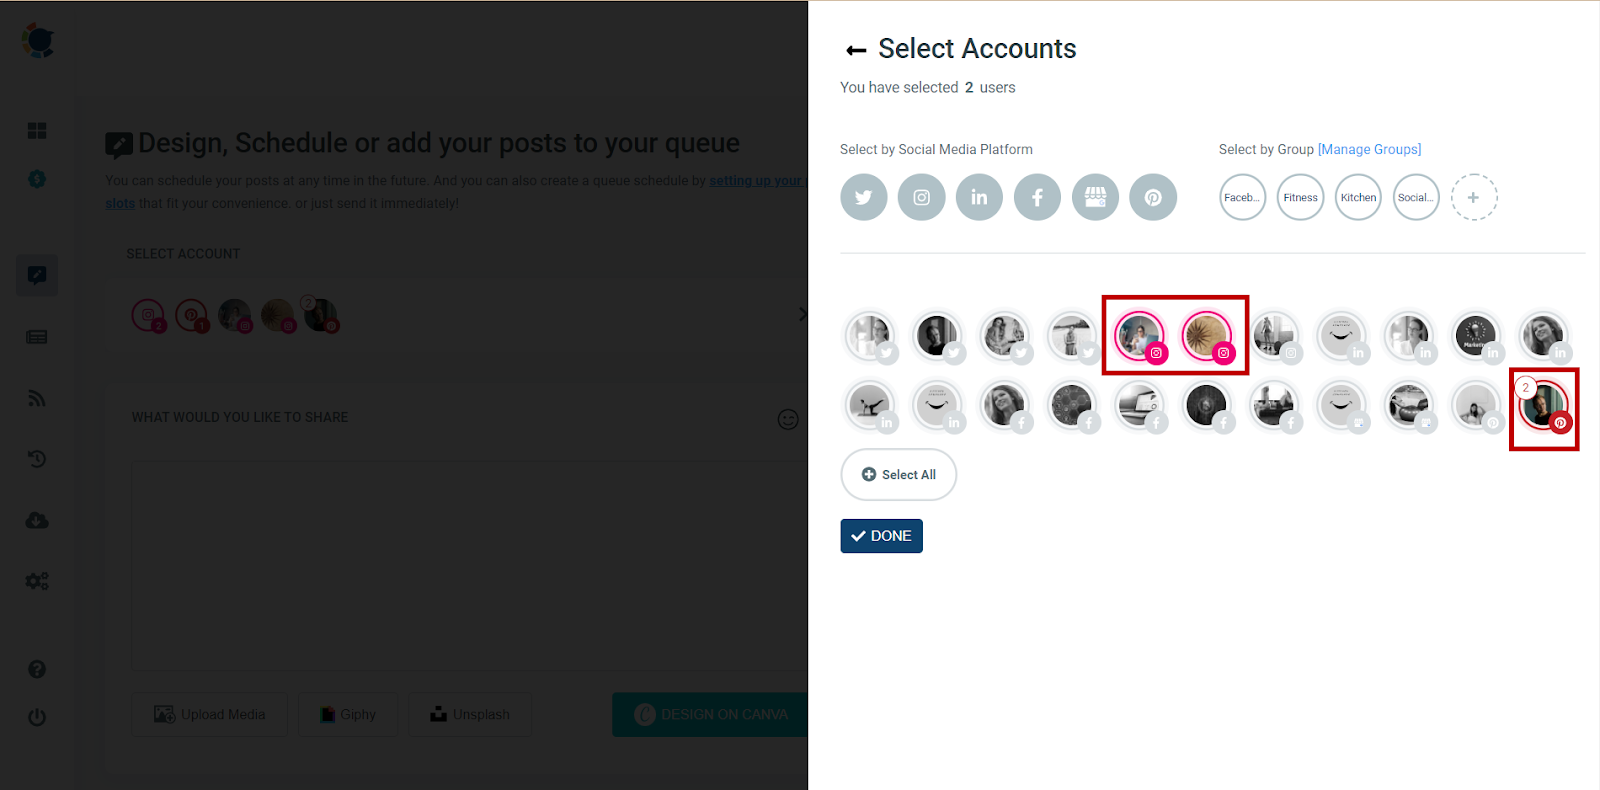 You can select multiple Instagram and Pinterest accounts at once.